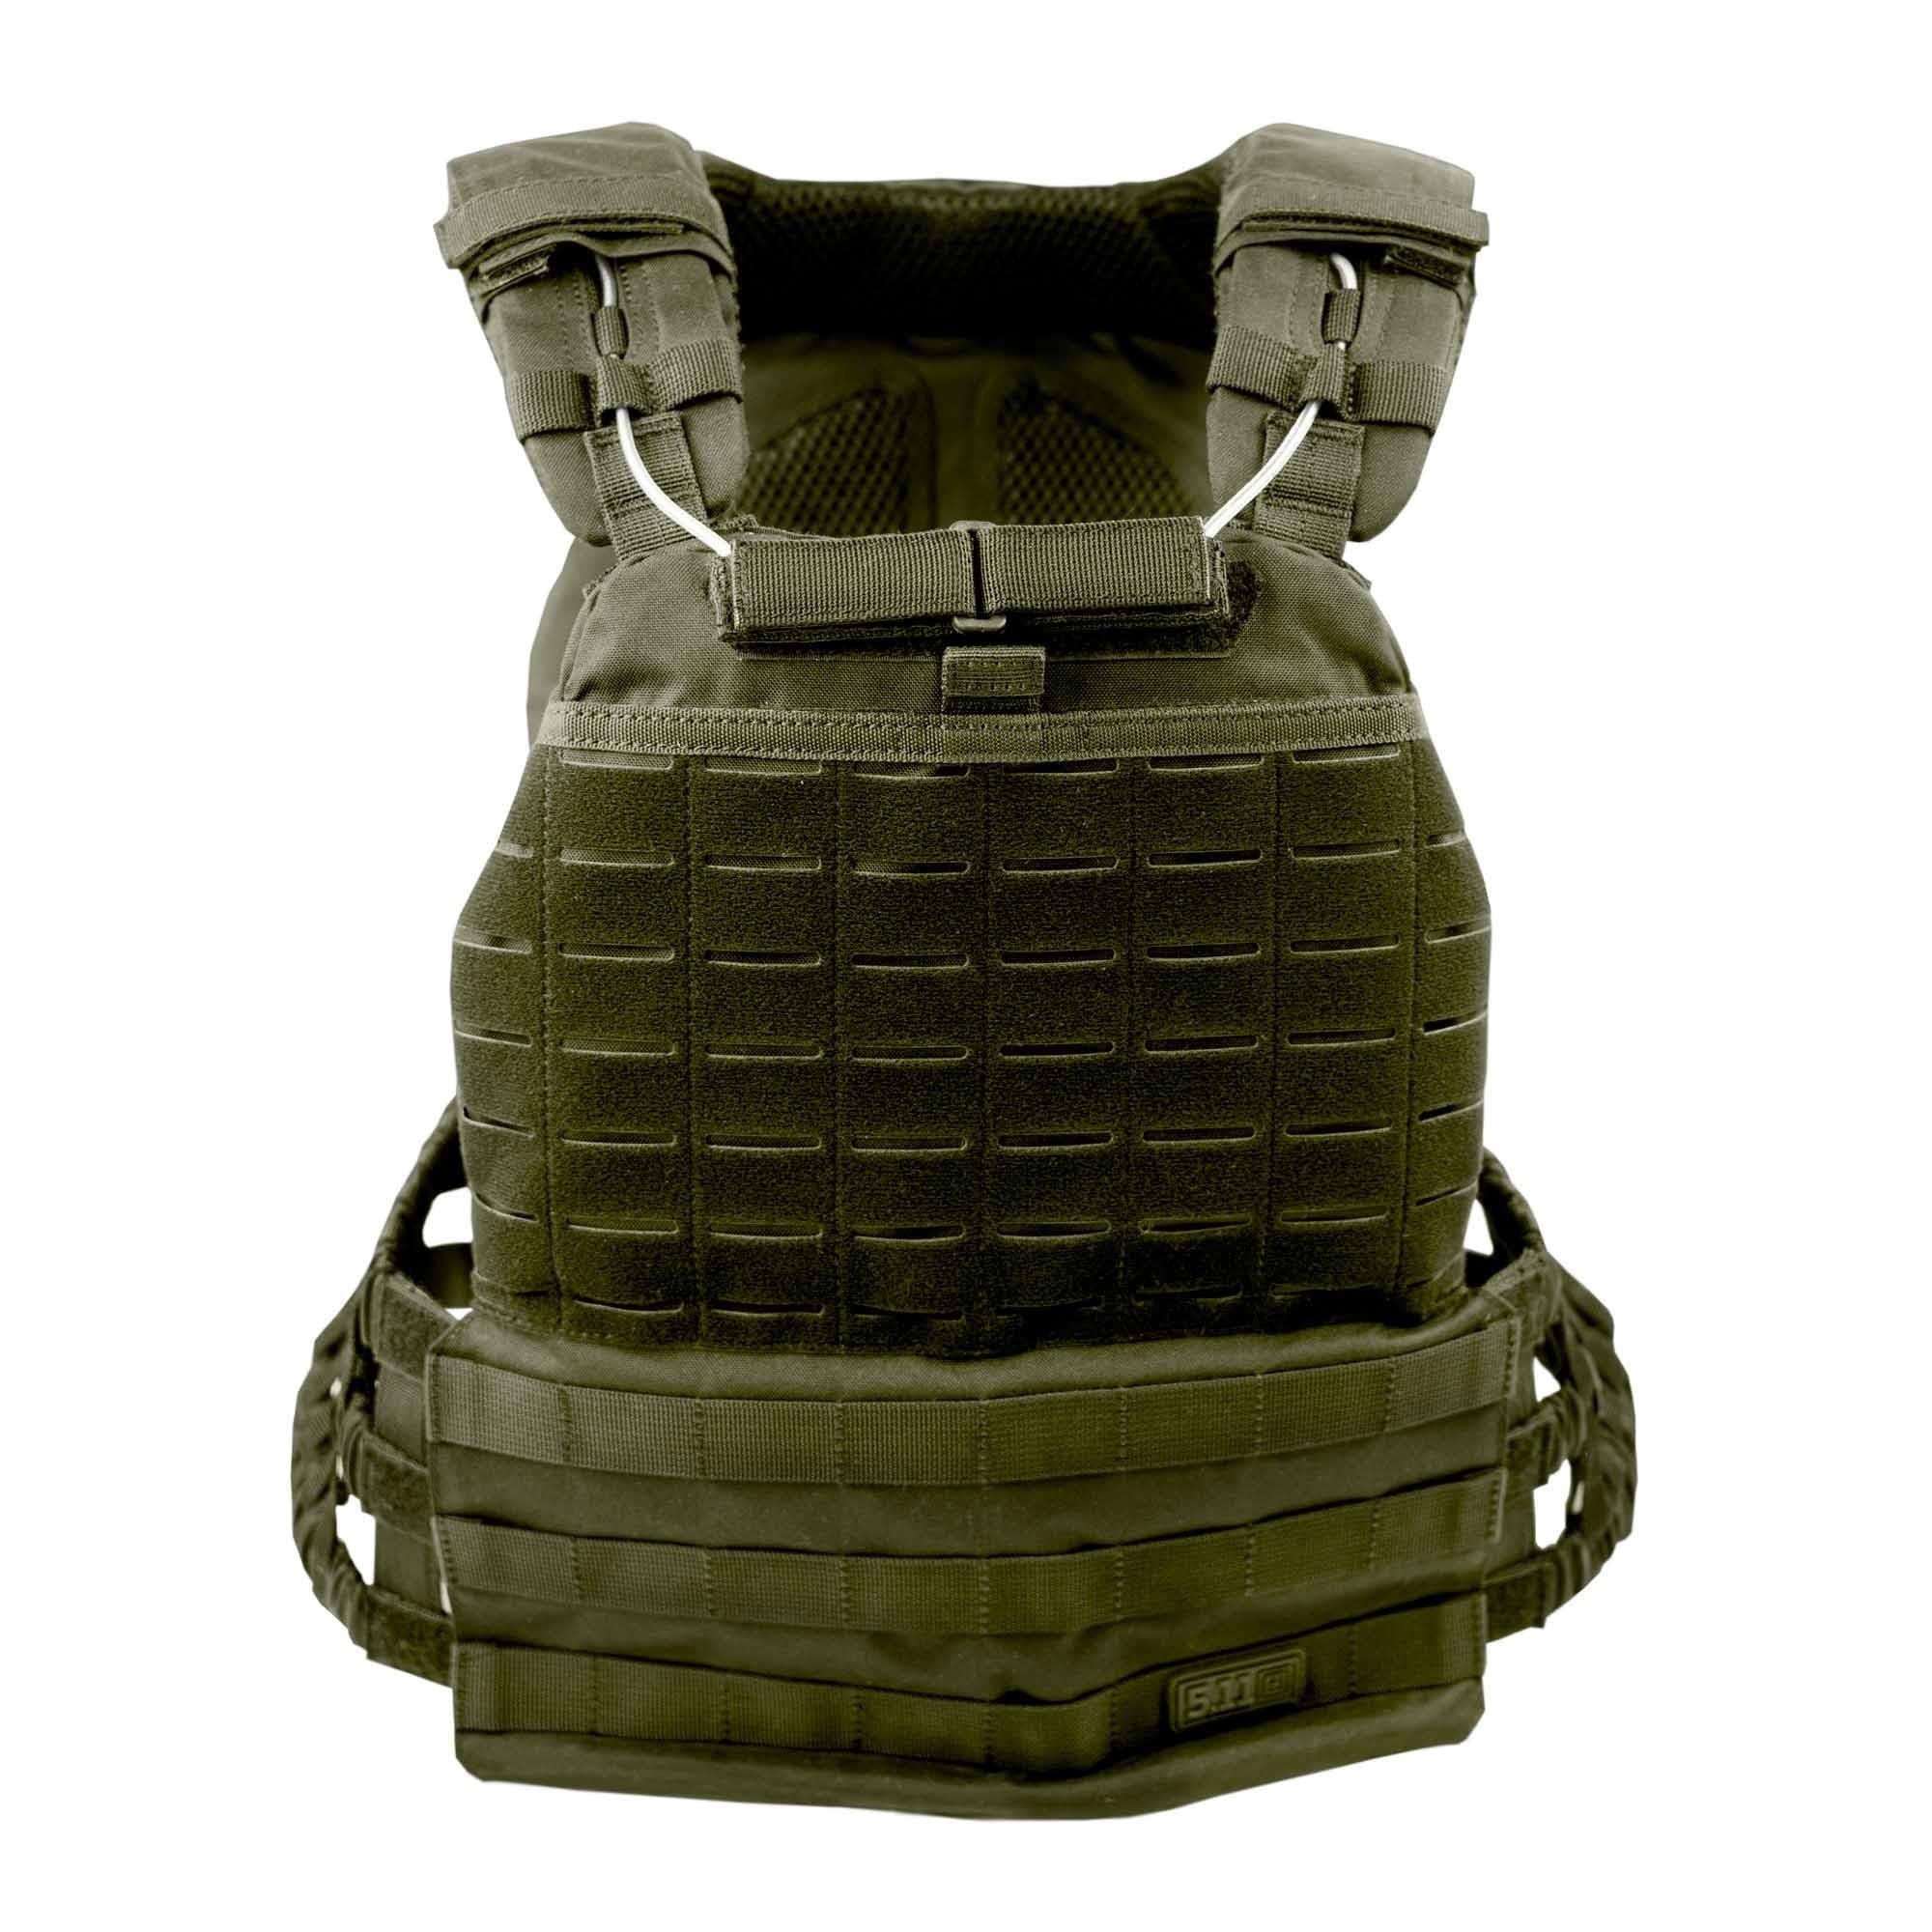 5.11 Tactical TacTec Trainer Weight Vest, Tough 600D Nylon, Style 56693,  One Size, Kangaroo, Weight Vests -  Canada